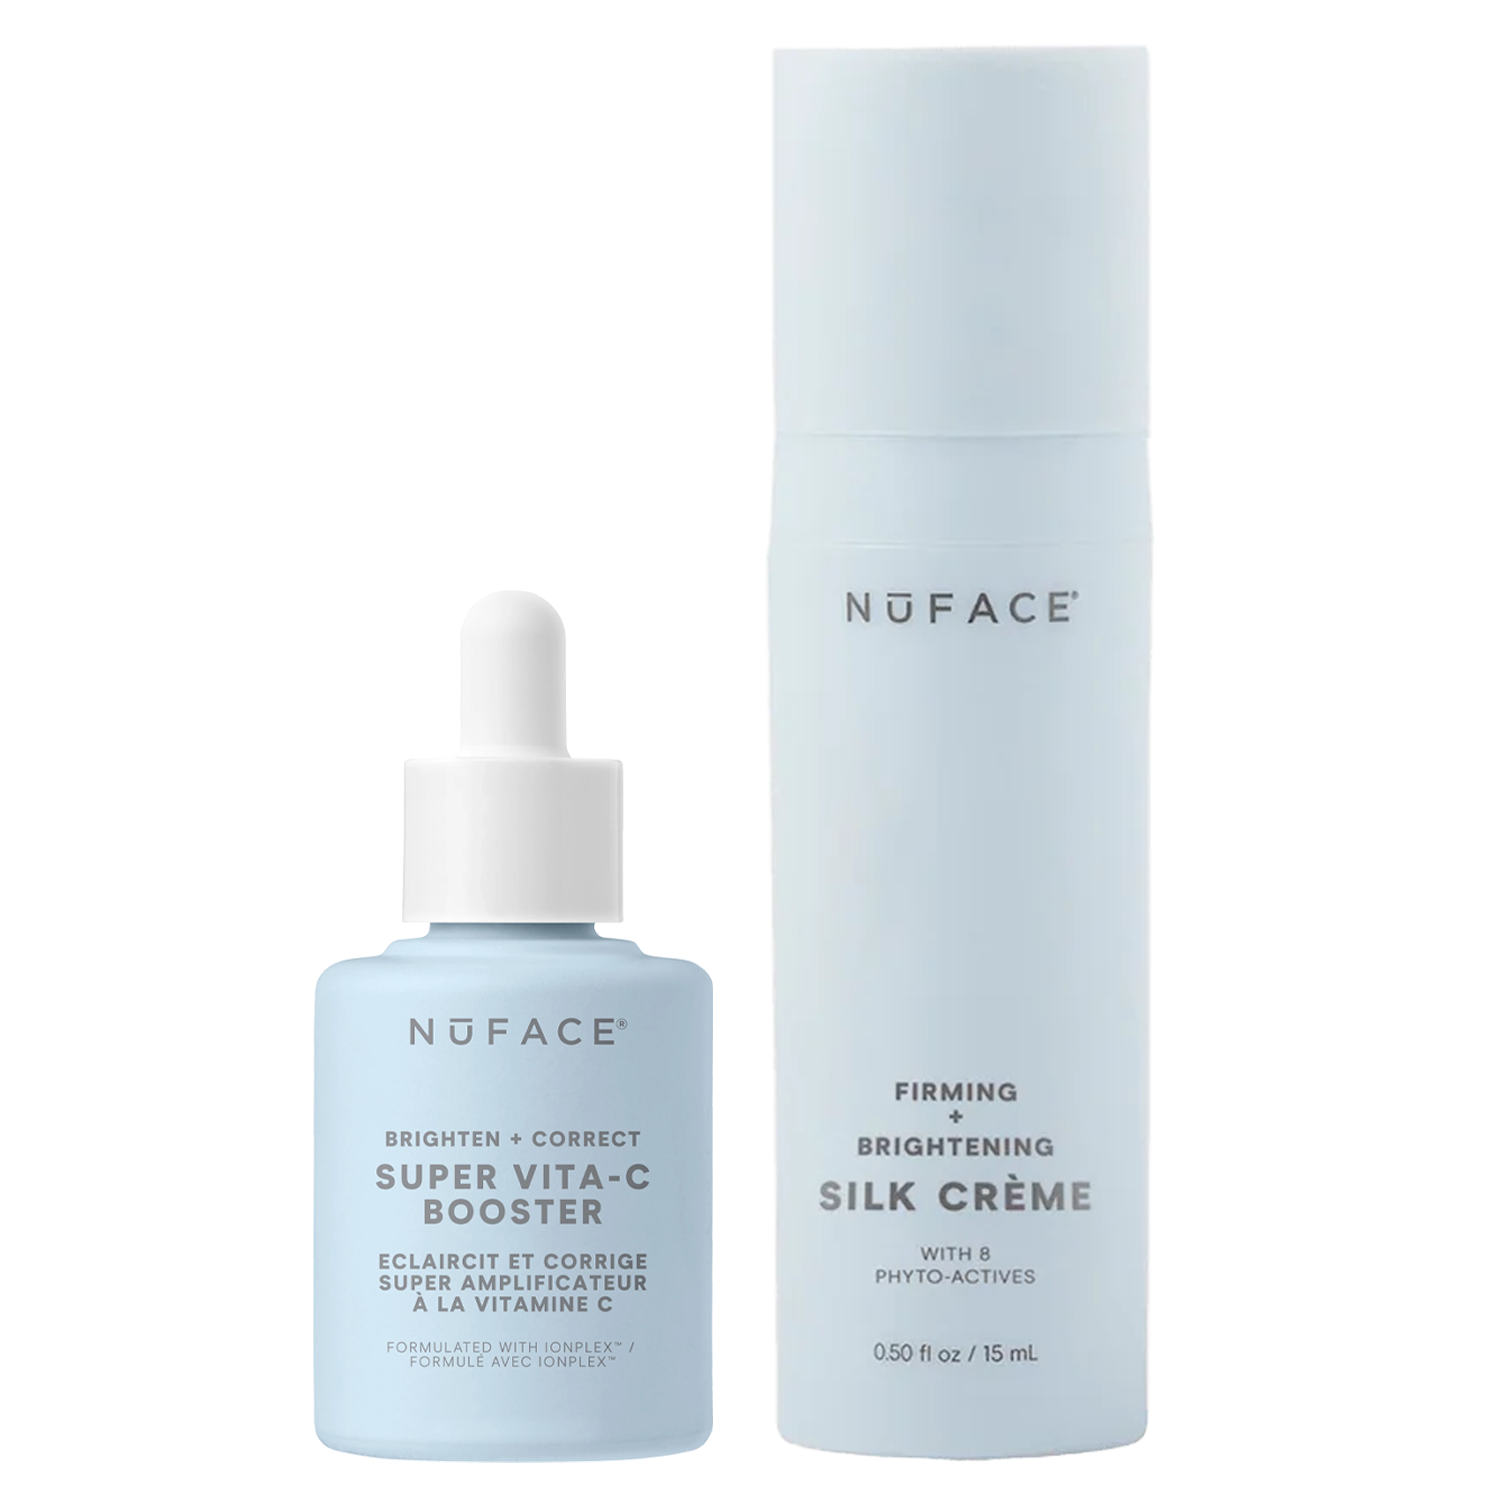 NuFACE® ENTER CODE: NUFACE | Free Nuface Gift w/ purchase of any Nuface Device at Socialite Beauty Canada